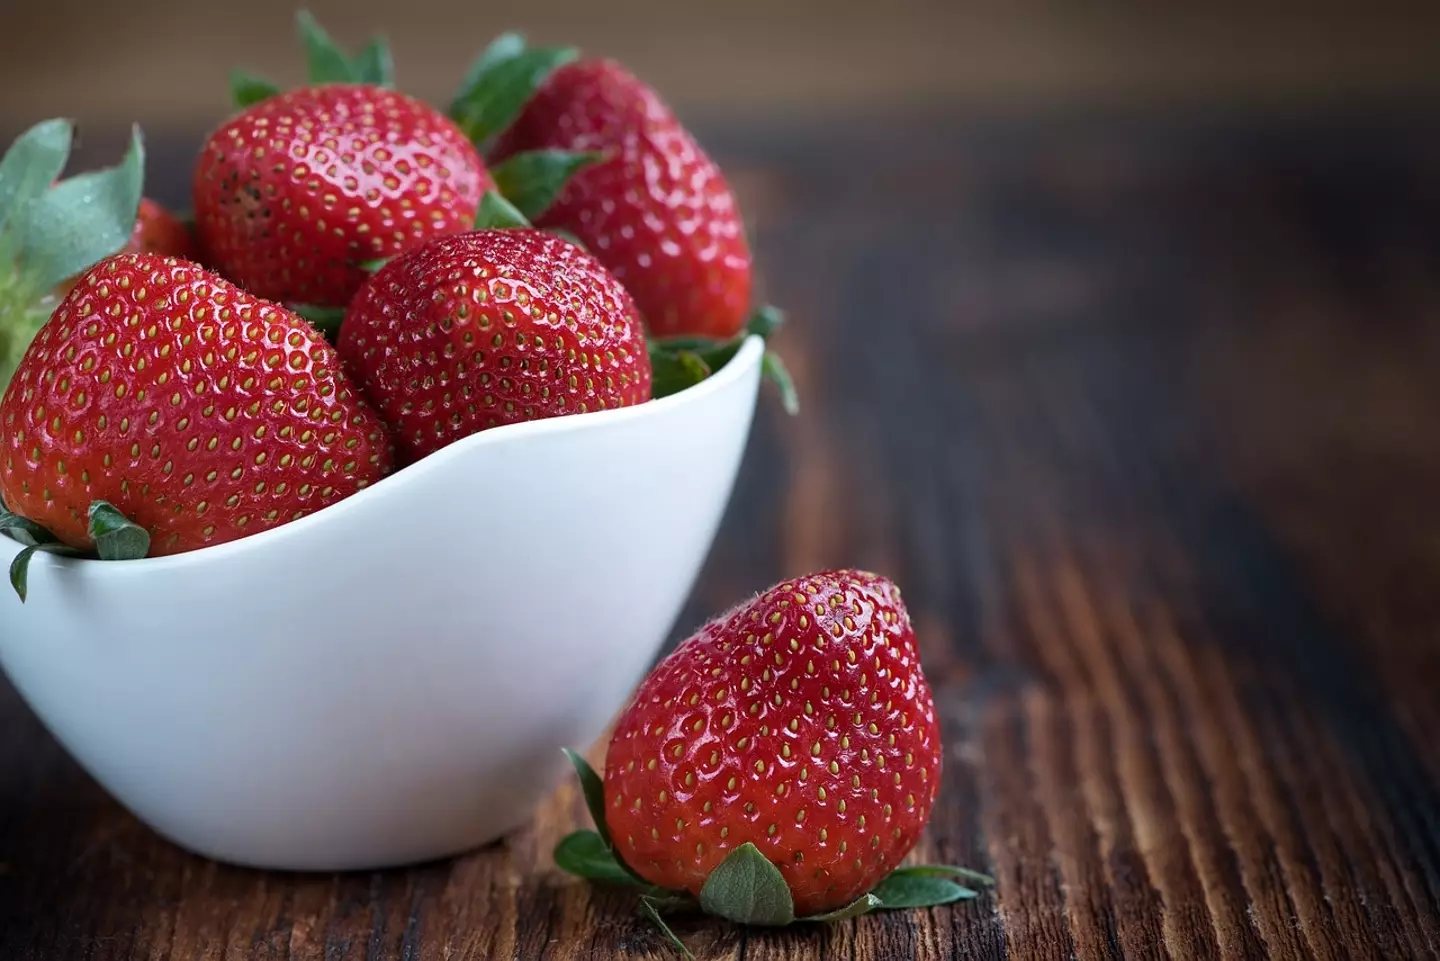 Actual strawberries are much more appealing.